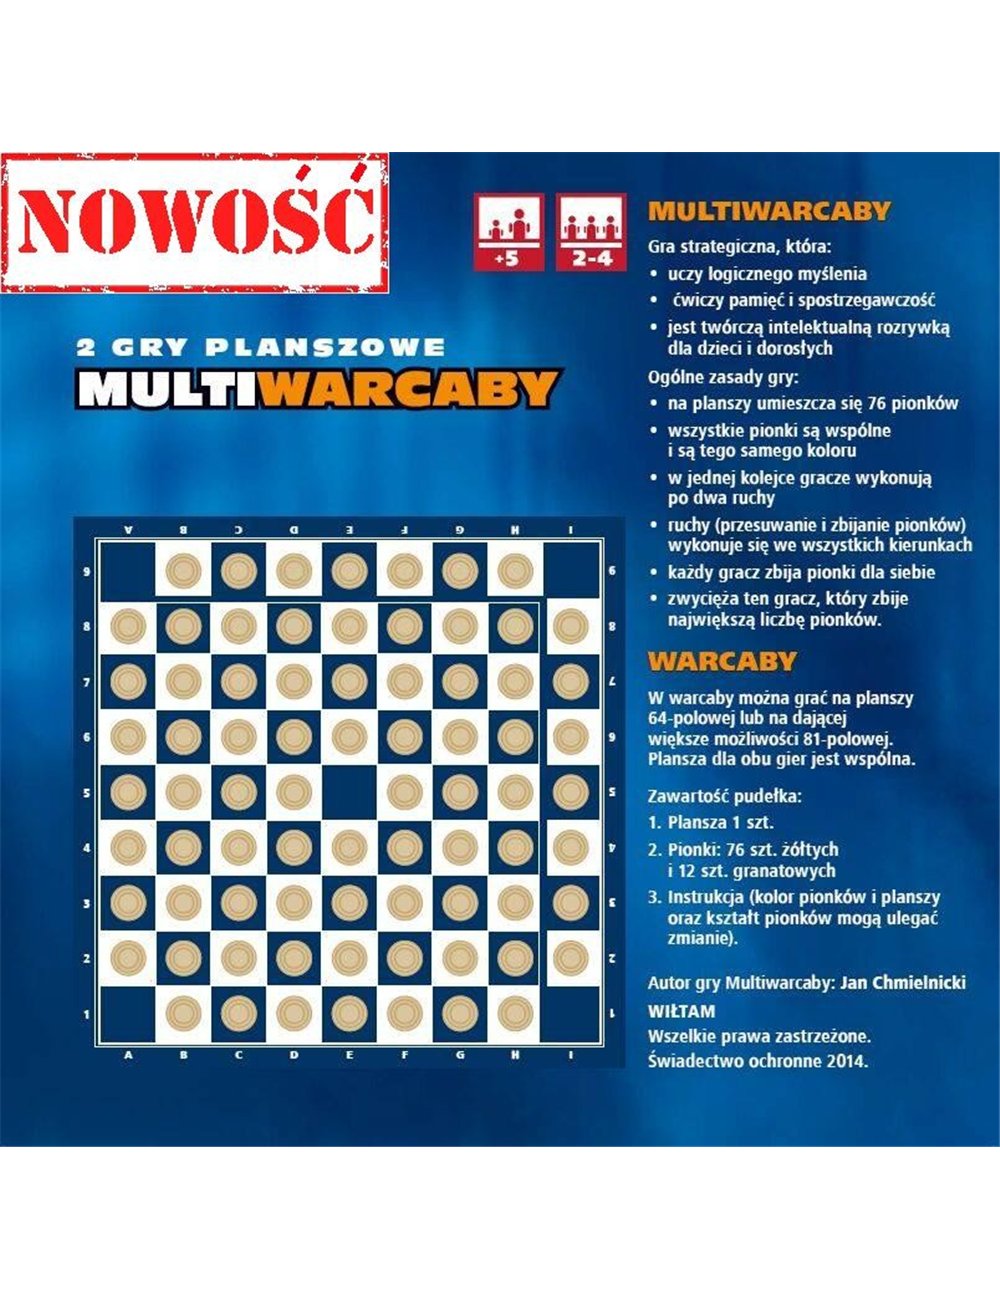 Multiwarcaby